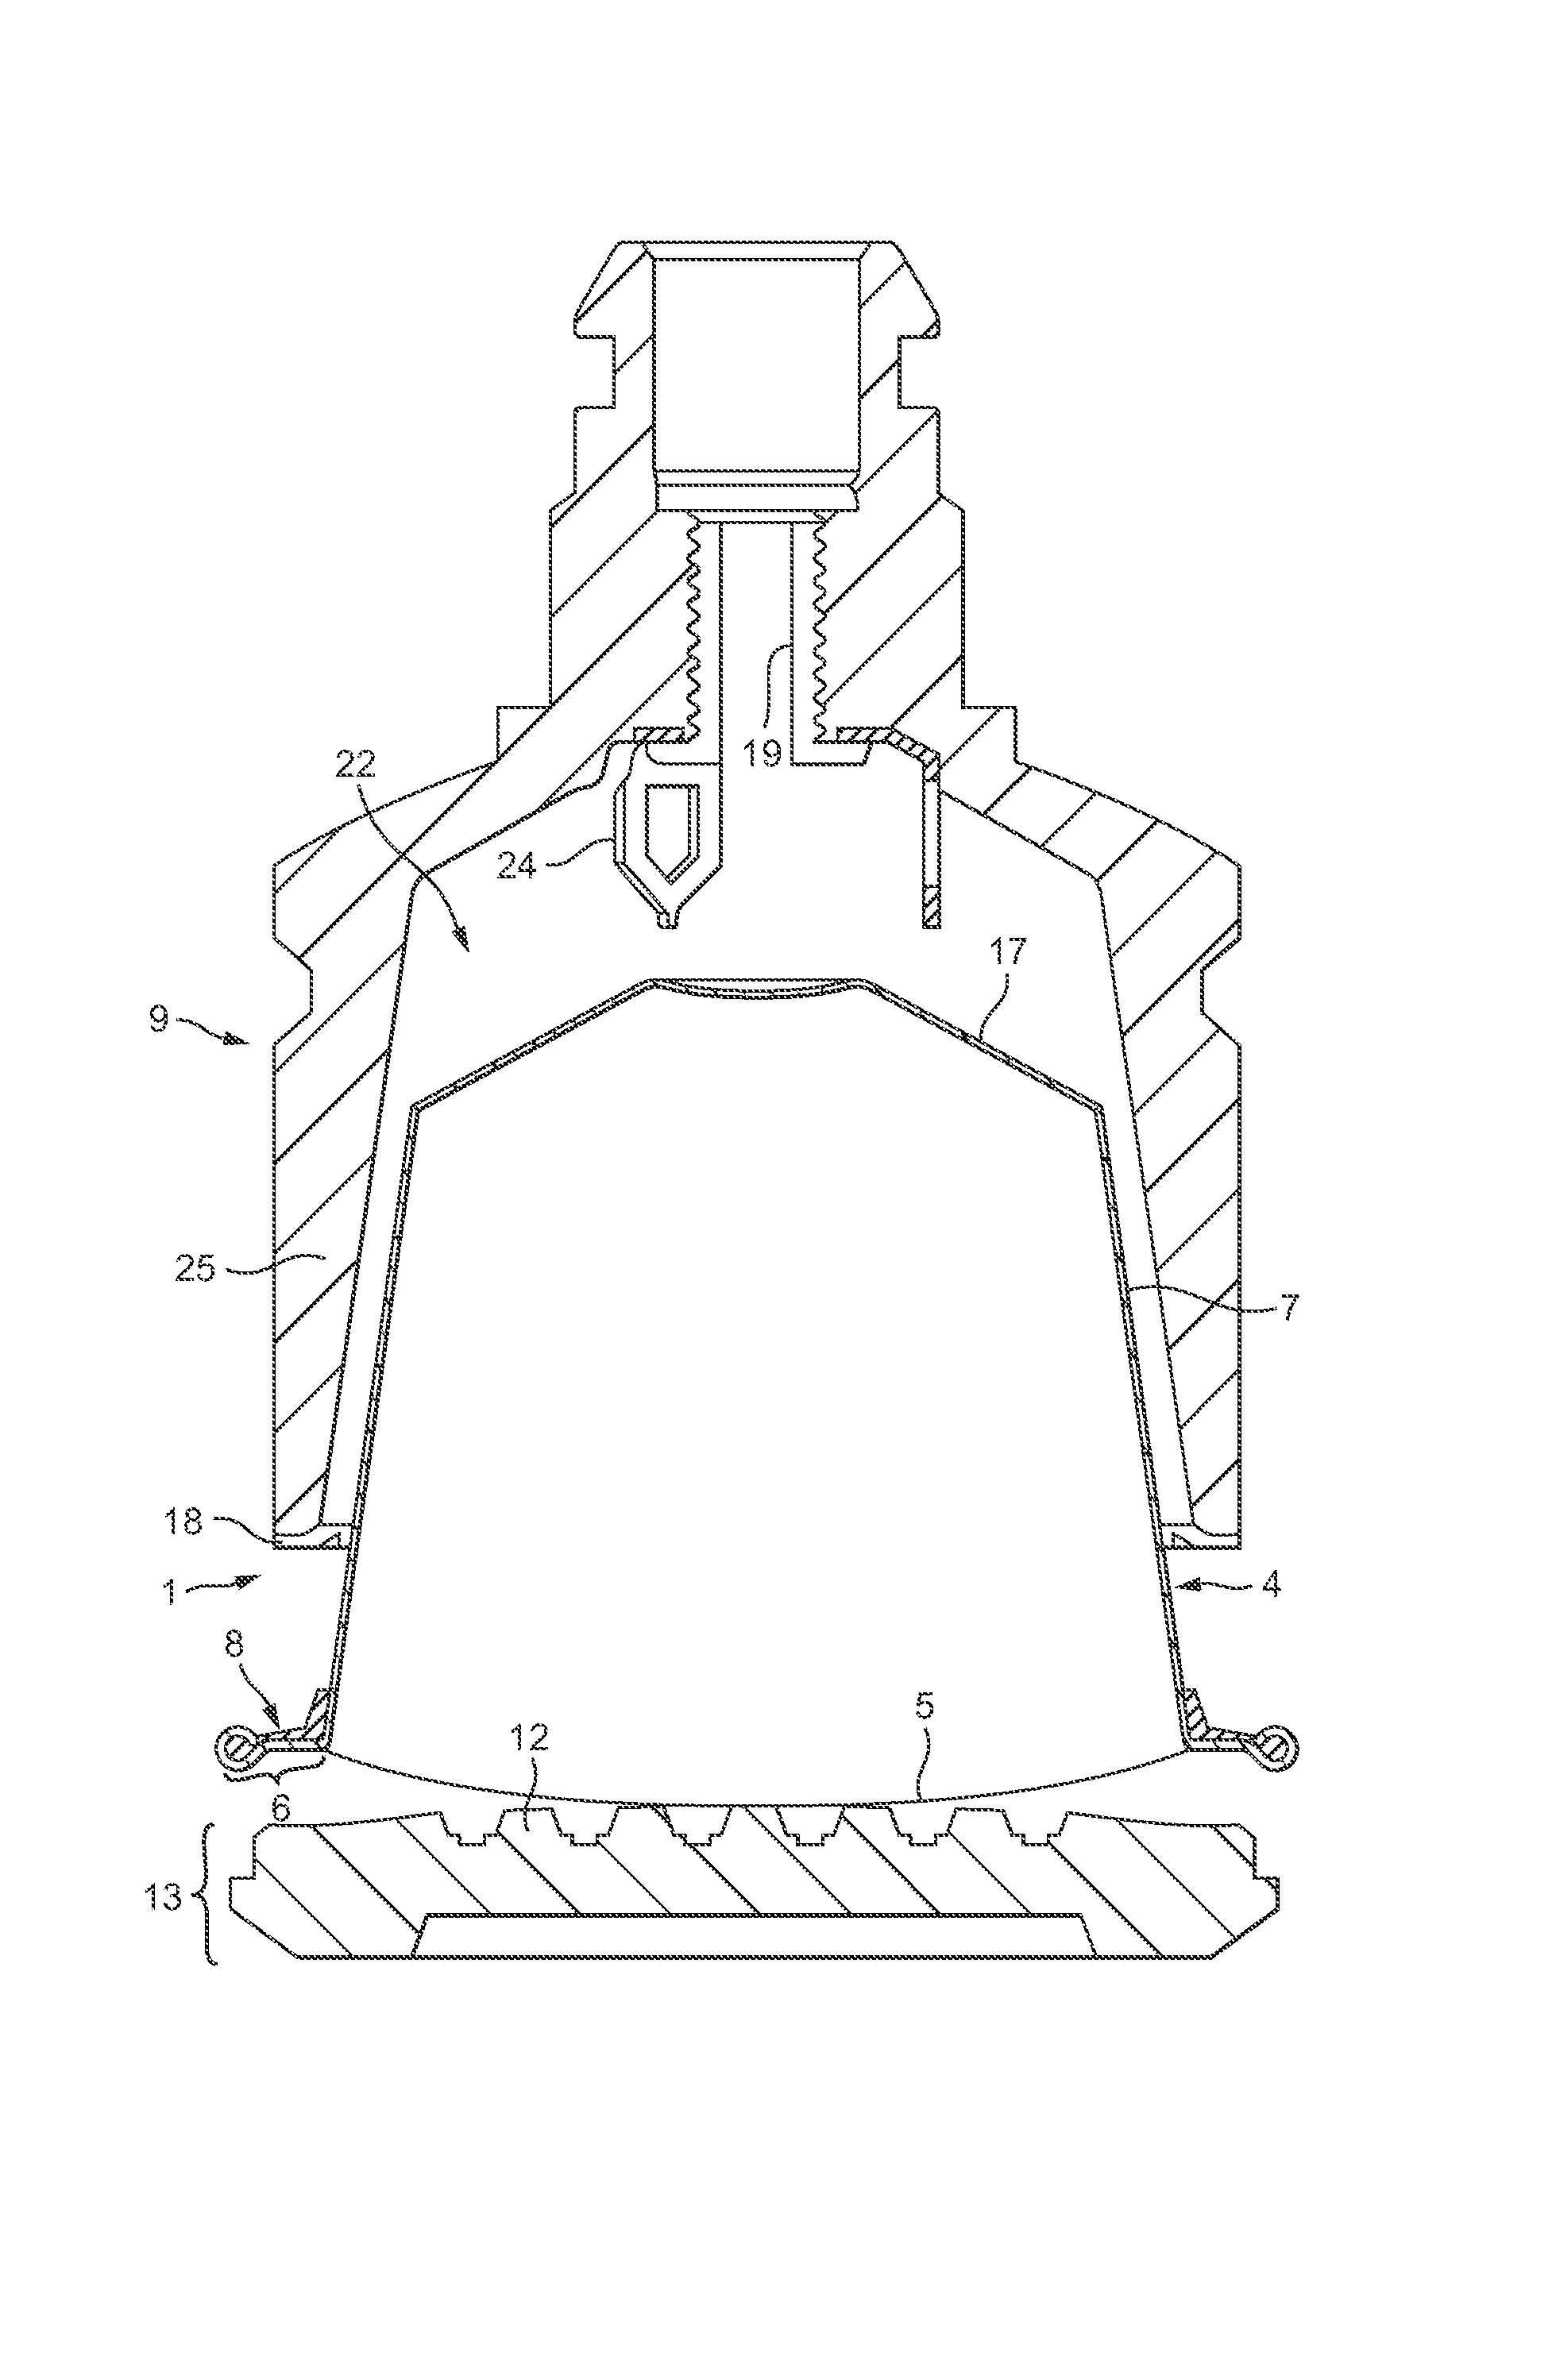 Capsule for preparing a beverage with a sealing member for water tightness attached thereto and method of producing the same